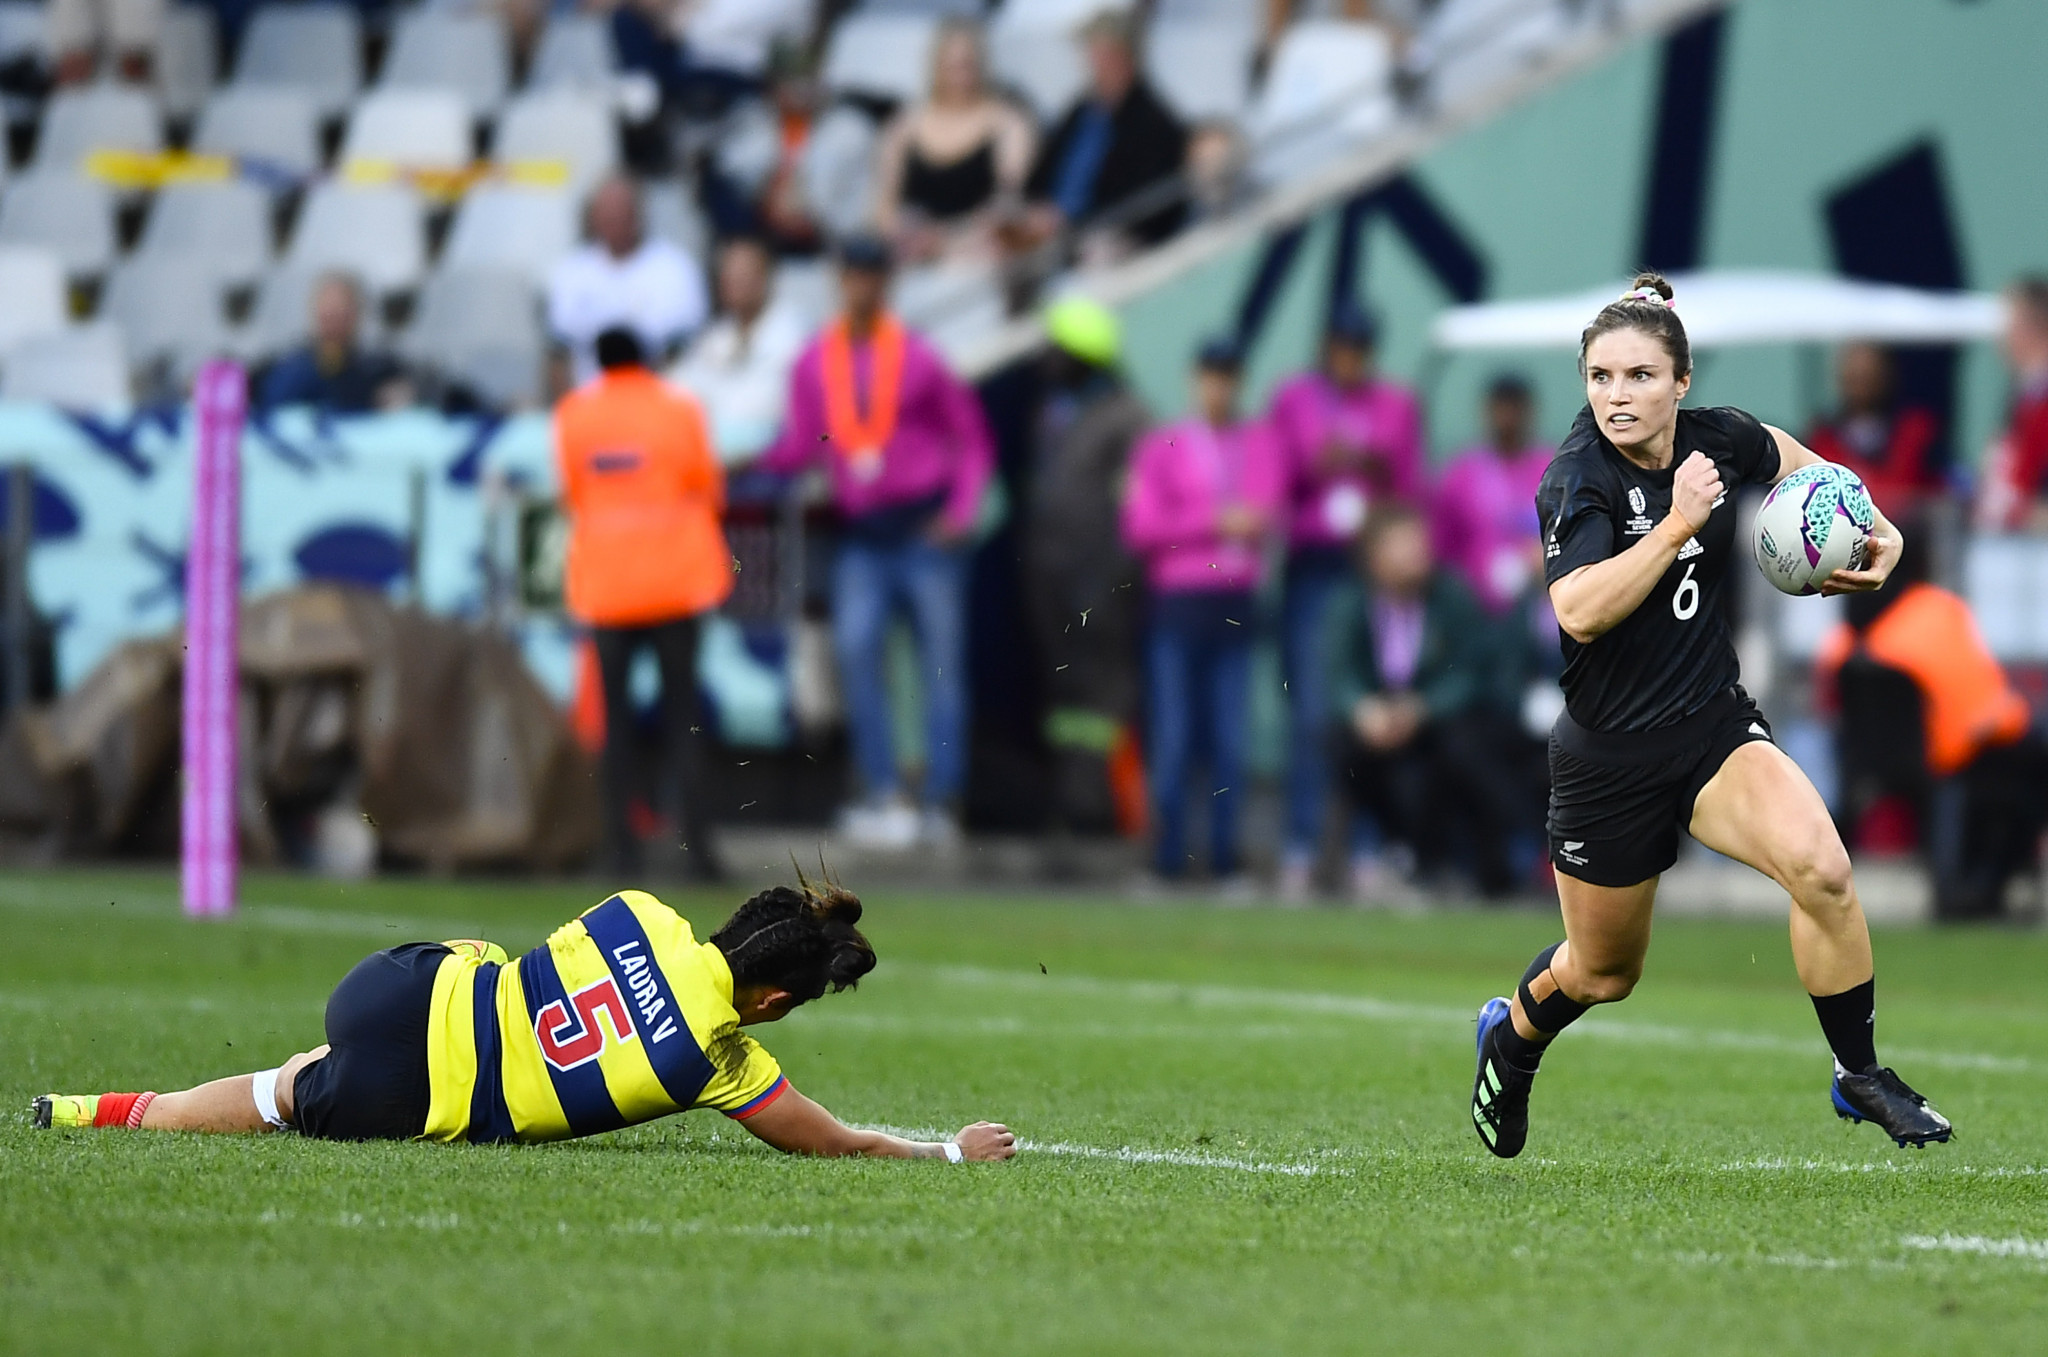 Both of New Zealand's teams have advanced in the Rugby World Cup Sevens in Cape Town ©Getty Images